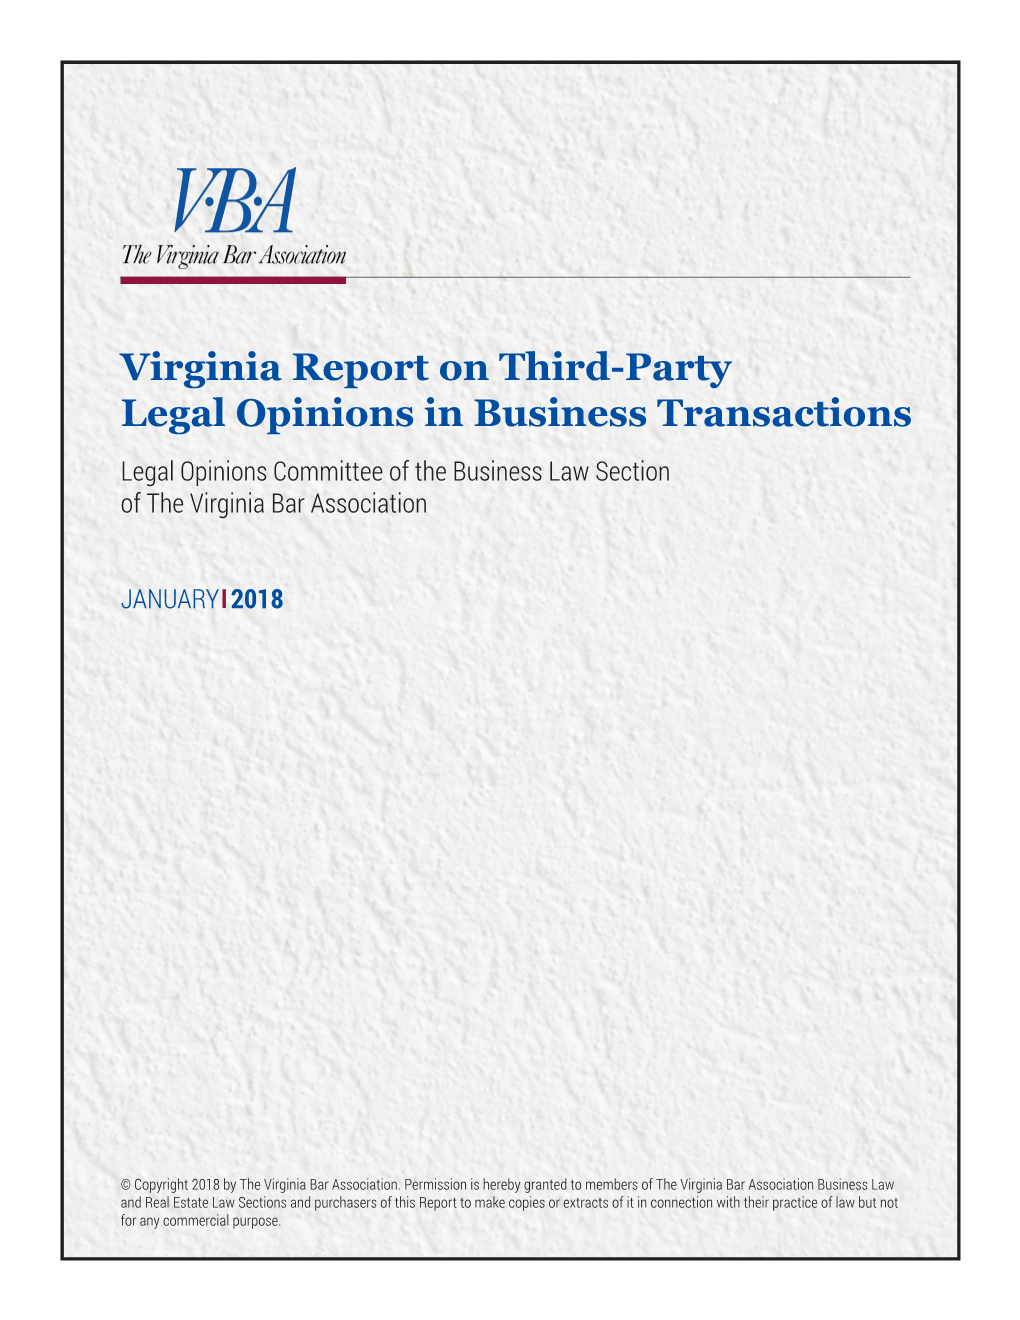 Virginia Report on Third-Party Legal Opinions in Business Transactions Legal Opinions Committee of the Business Law Section of the Virginia Bar Association